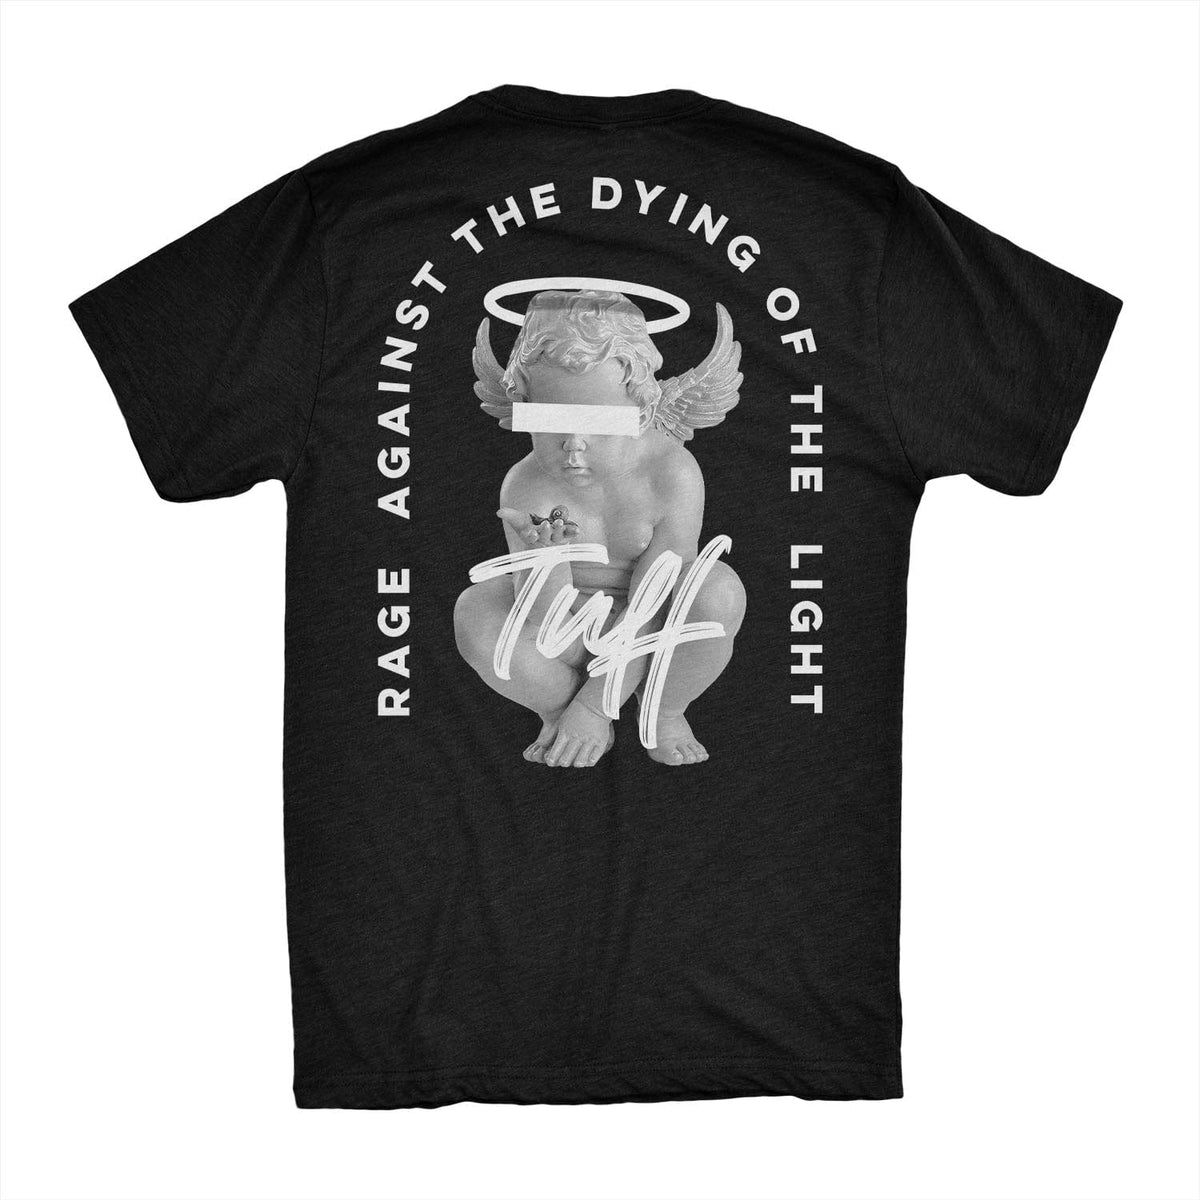 Rage Against the Dying of the Light Tee S / Black TuffWraps.com